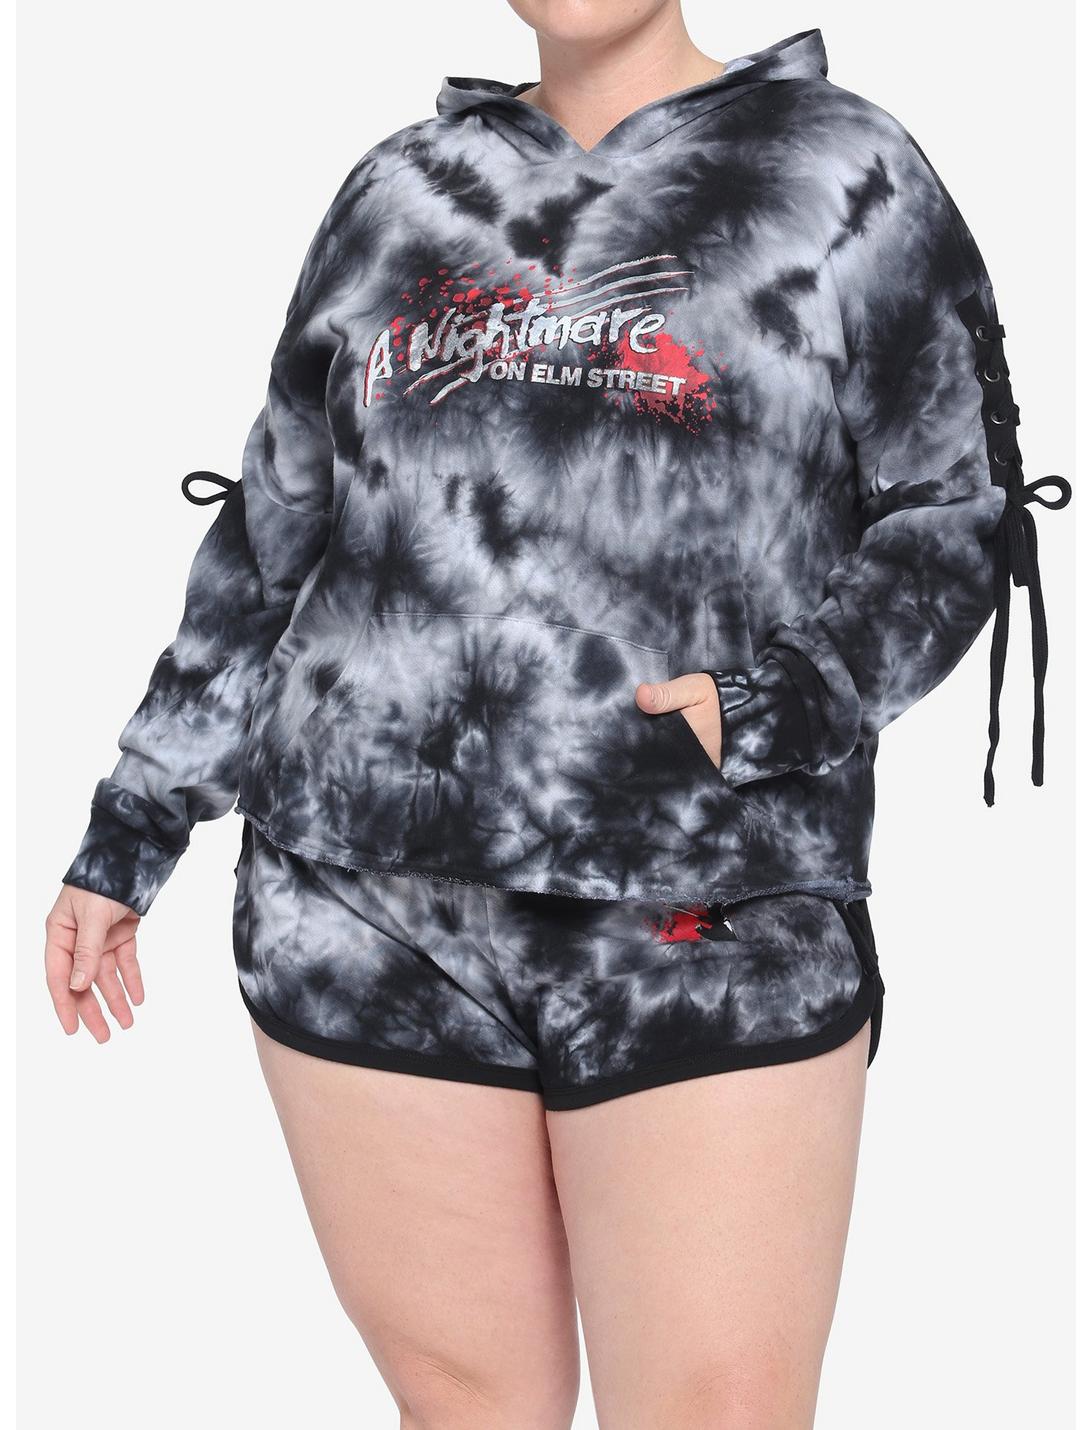 A Nightmare On Elm Street Lace-Up Girls Hoodie Plus Size, MULTI, hi-res